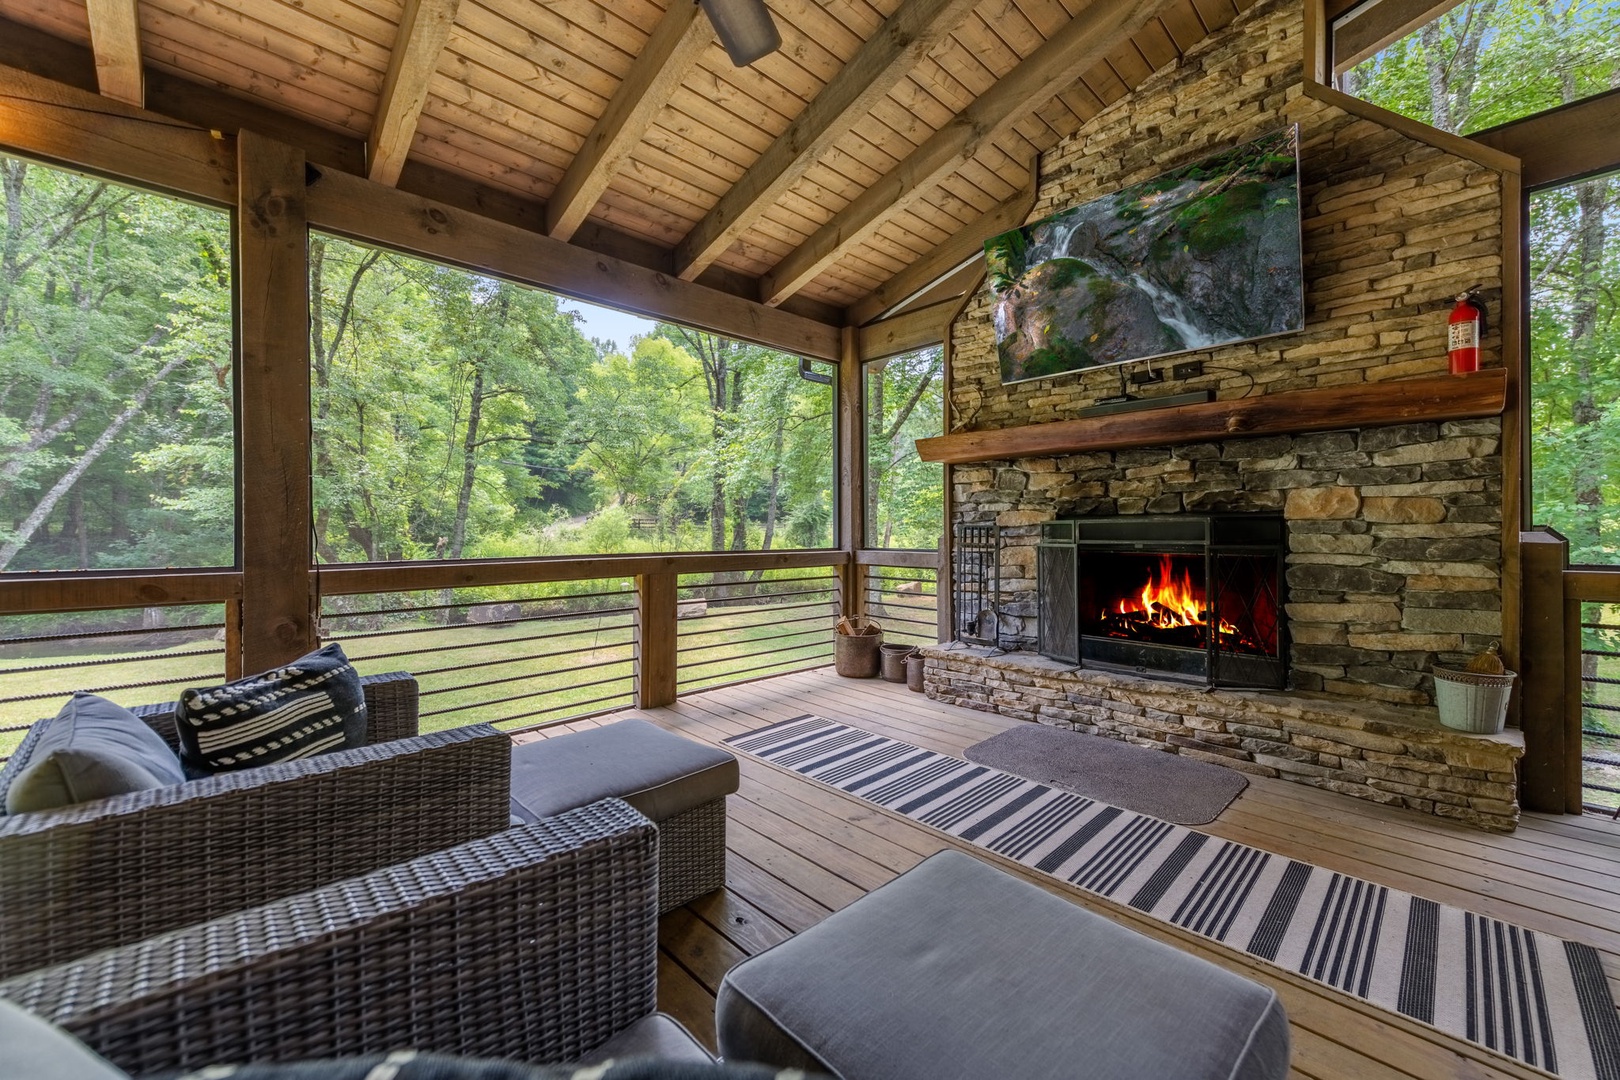 Indian Creek Lodge - Deck Seating and Fireplace